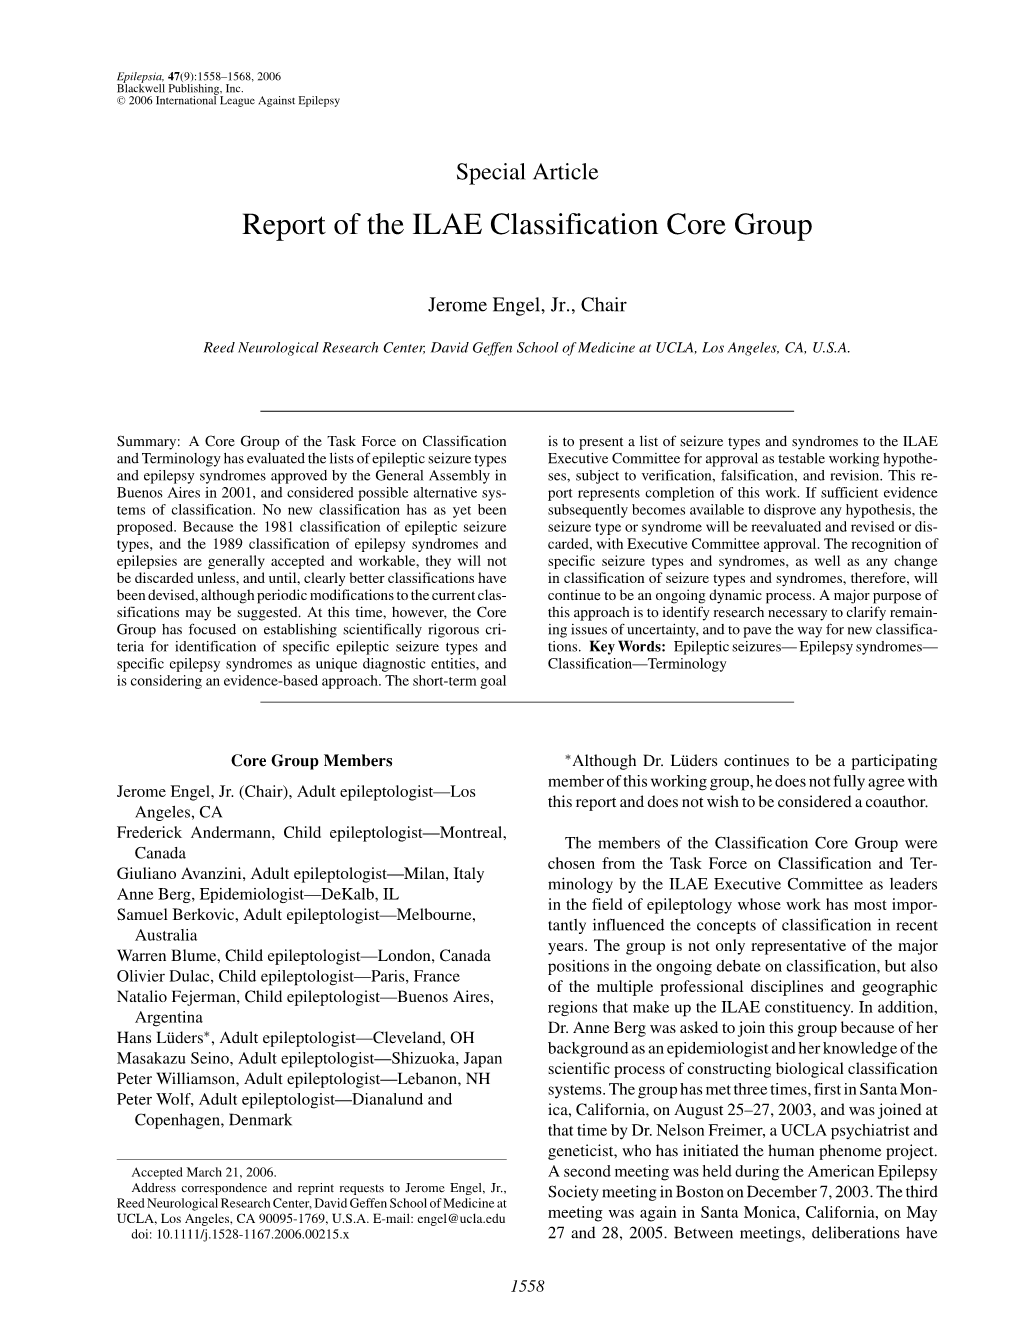 Report of the ILAE Classification Core Group